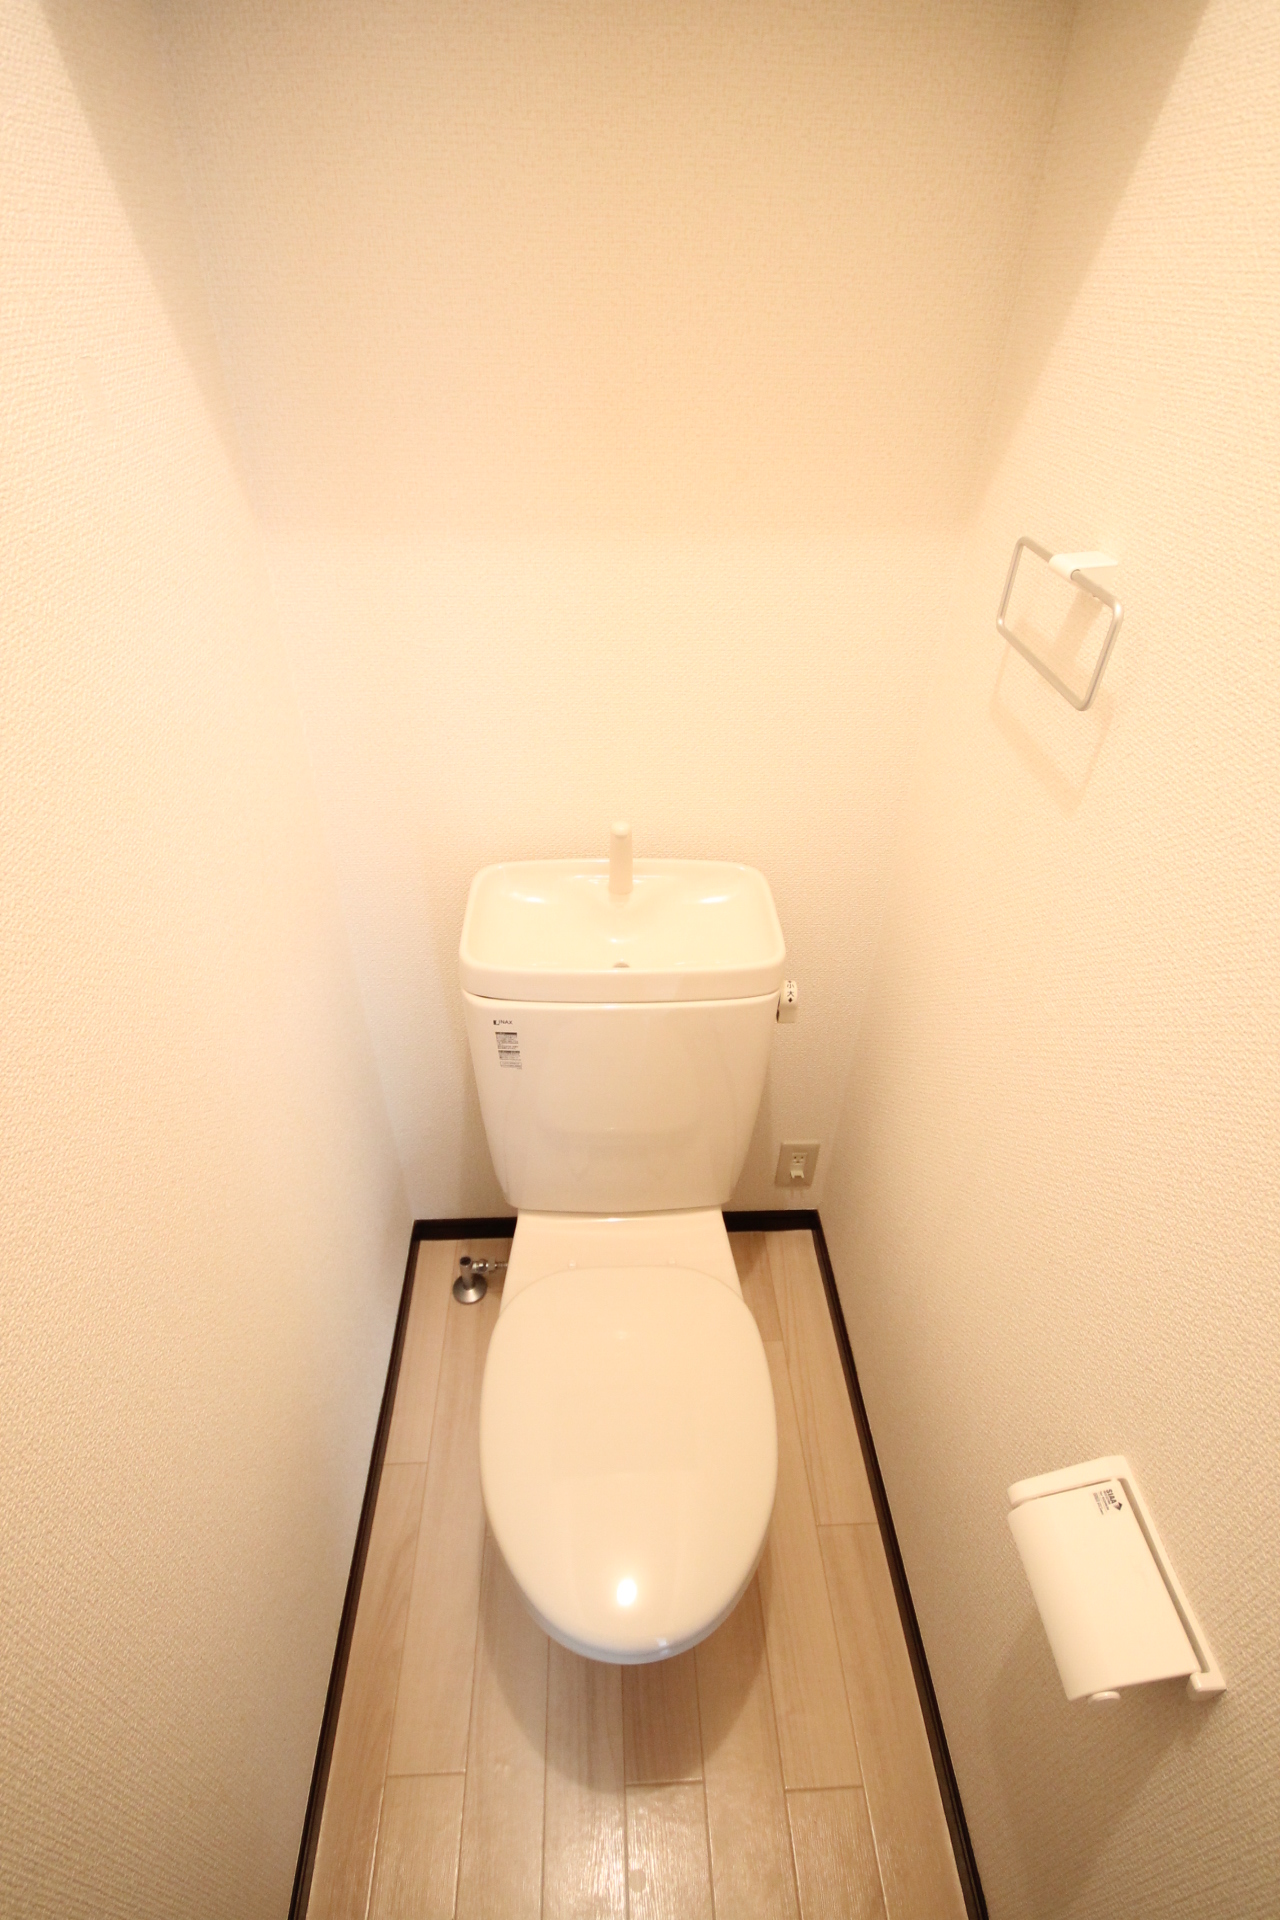 Toilet. It is similar to Listing